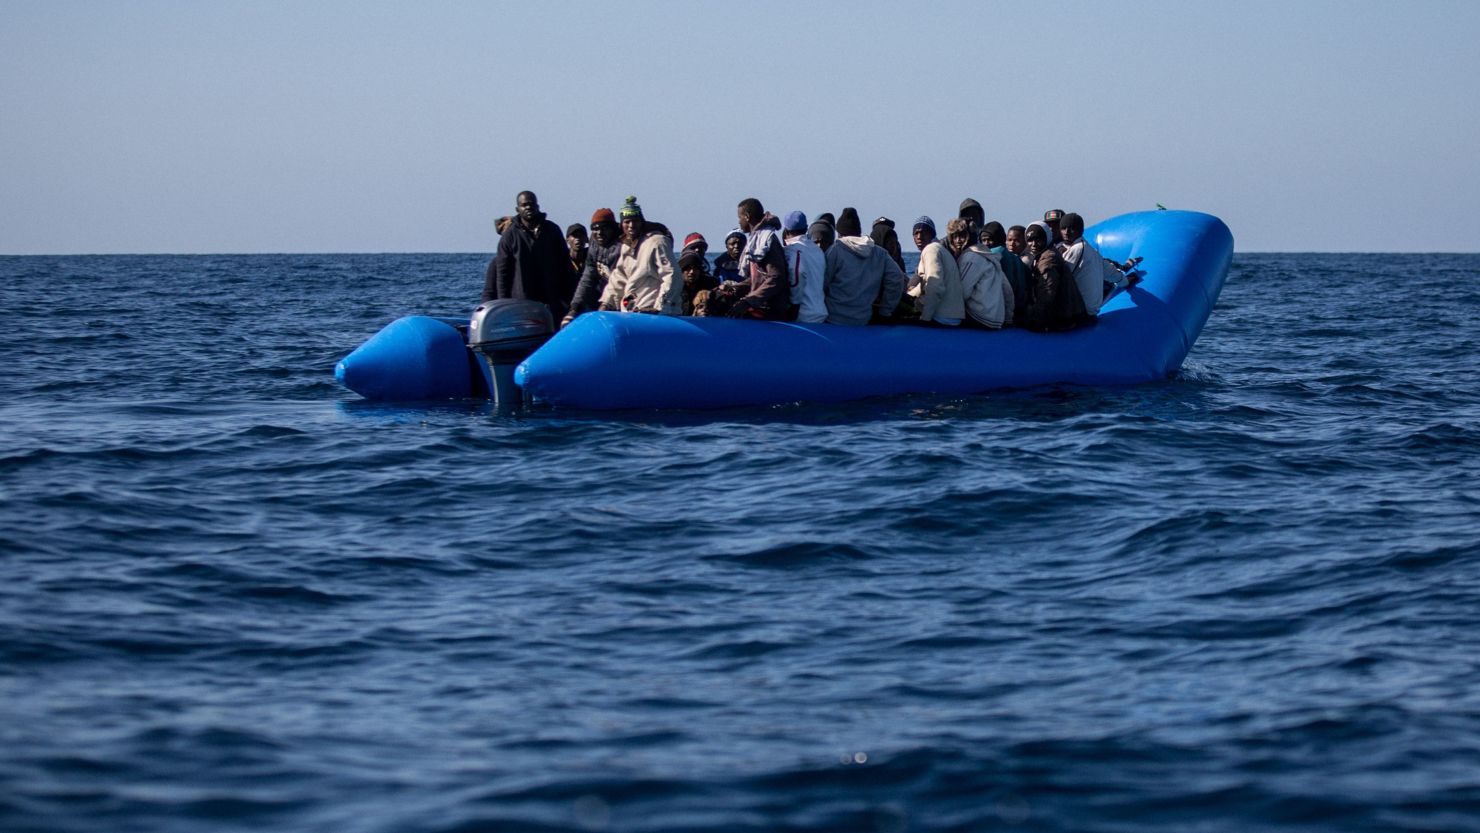 An unflatable boat with 47 migrants on board is pictured while being rescued by the Dutch-flagged Sea Watch 3 off Libya's coasts on January 19, 2019.